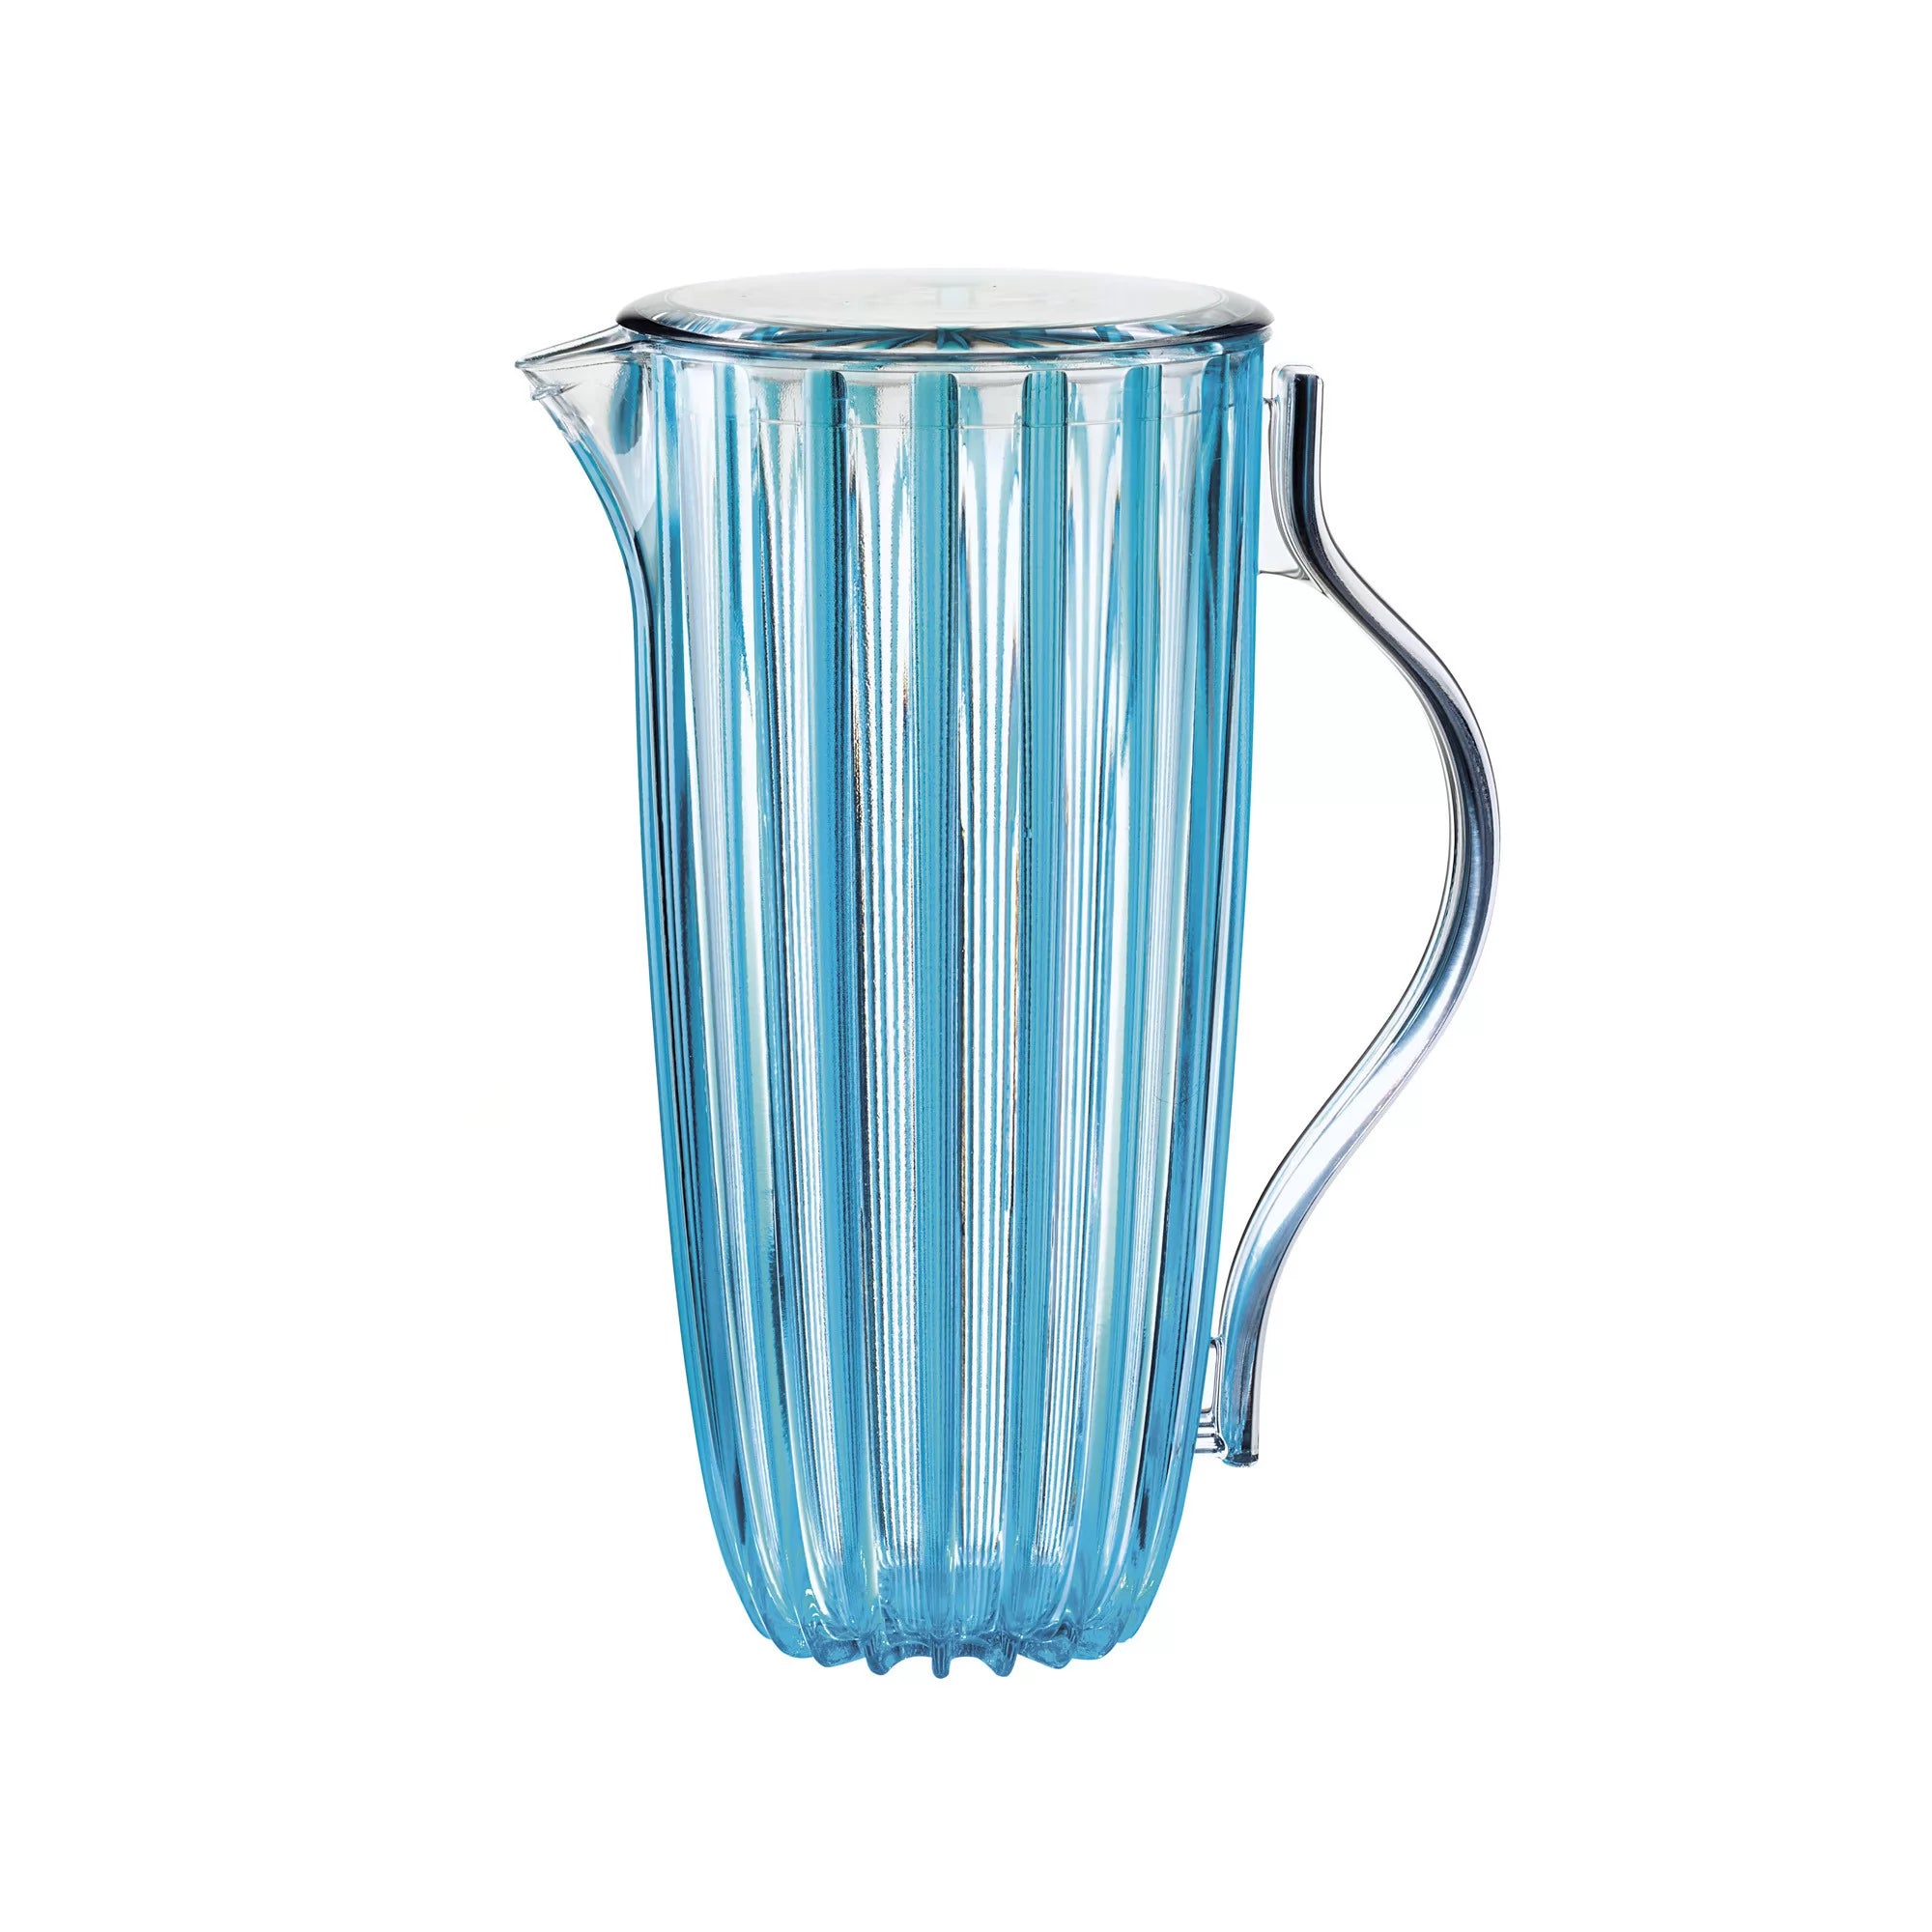 Guzzini Dolcevita Pitcher With Lid – Turquoise